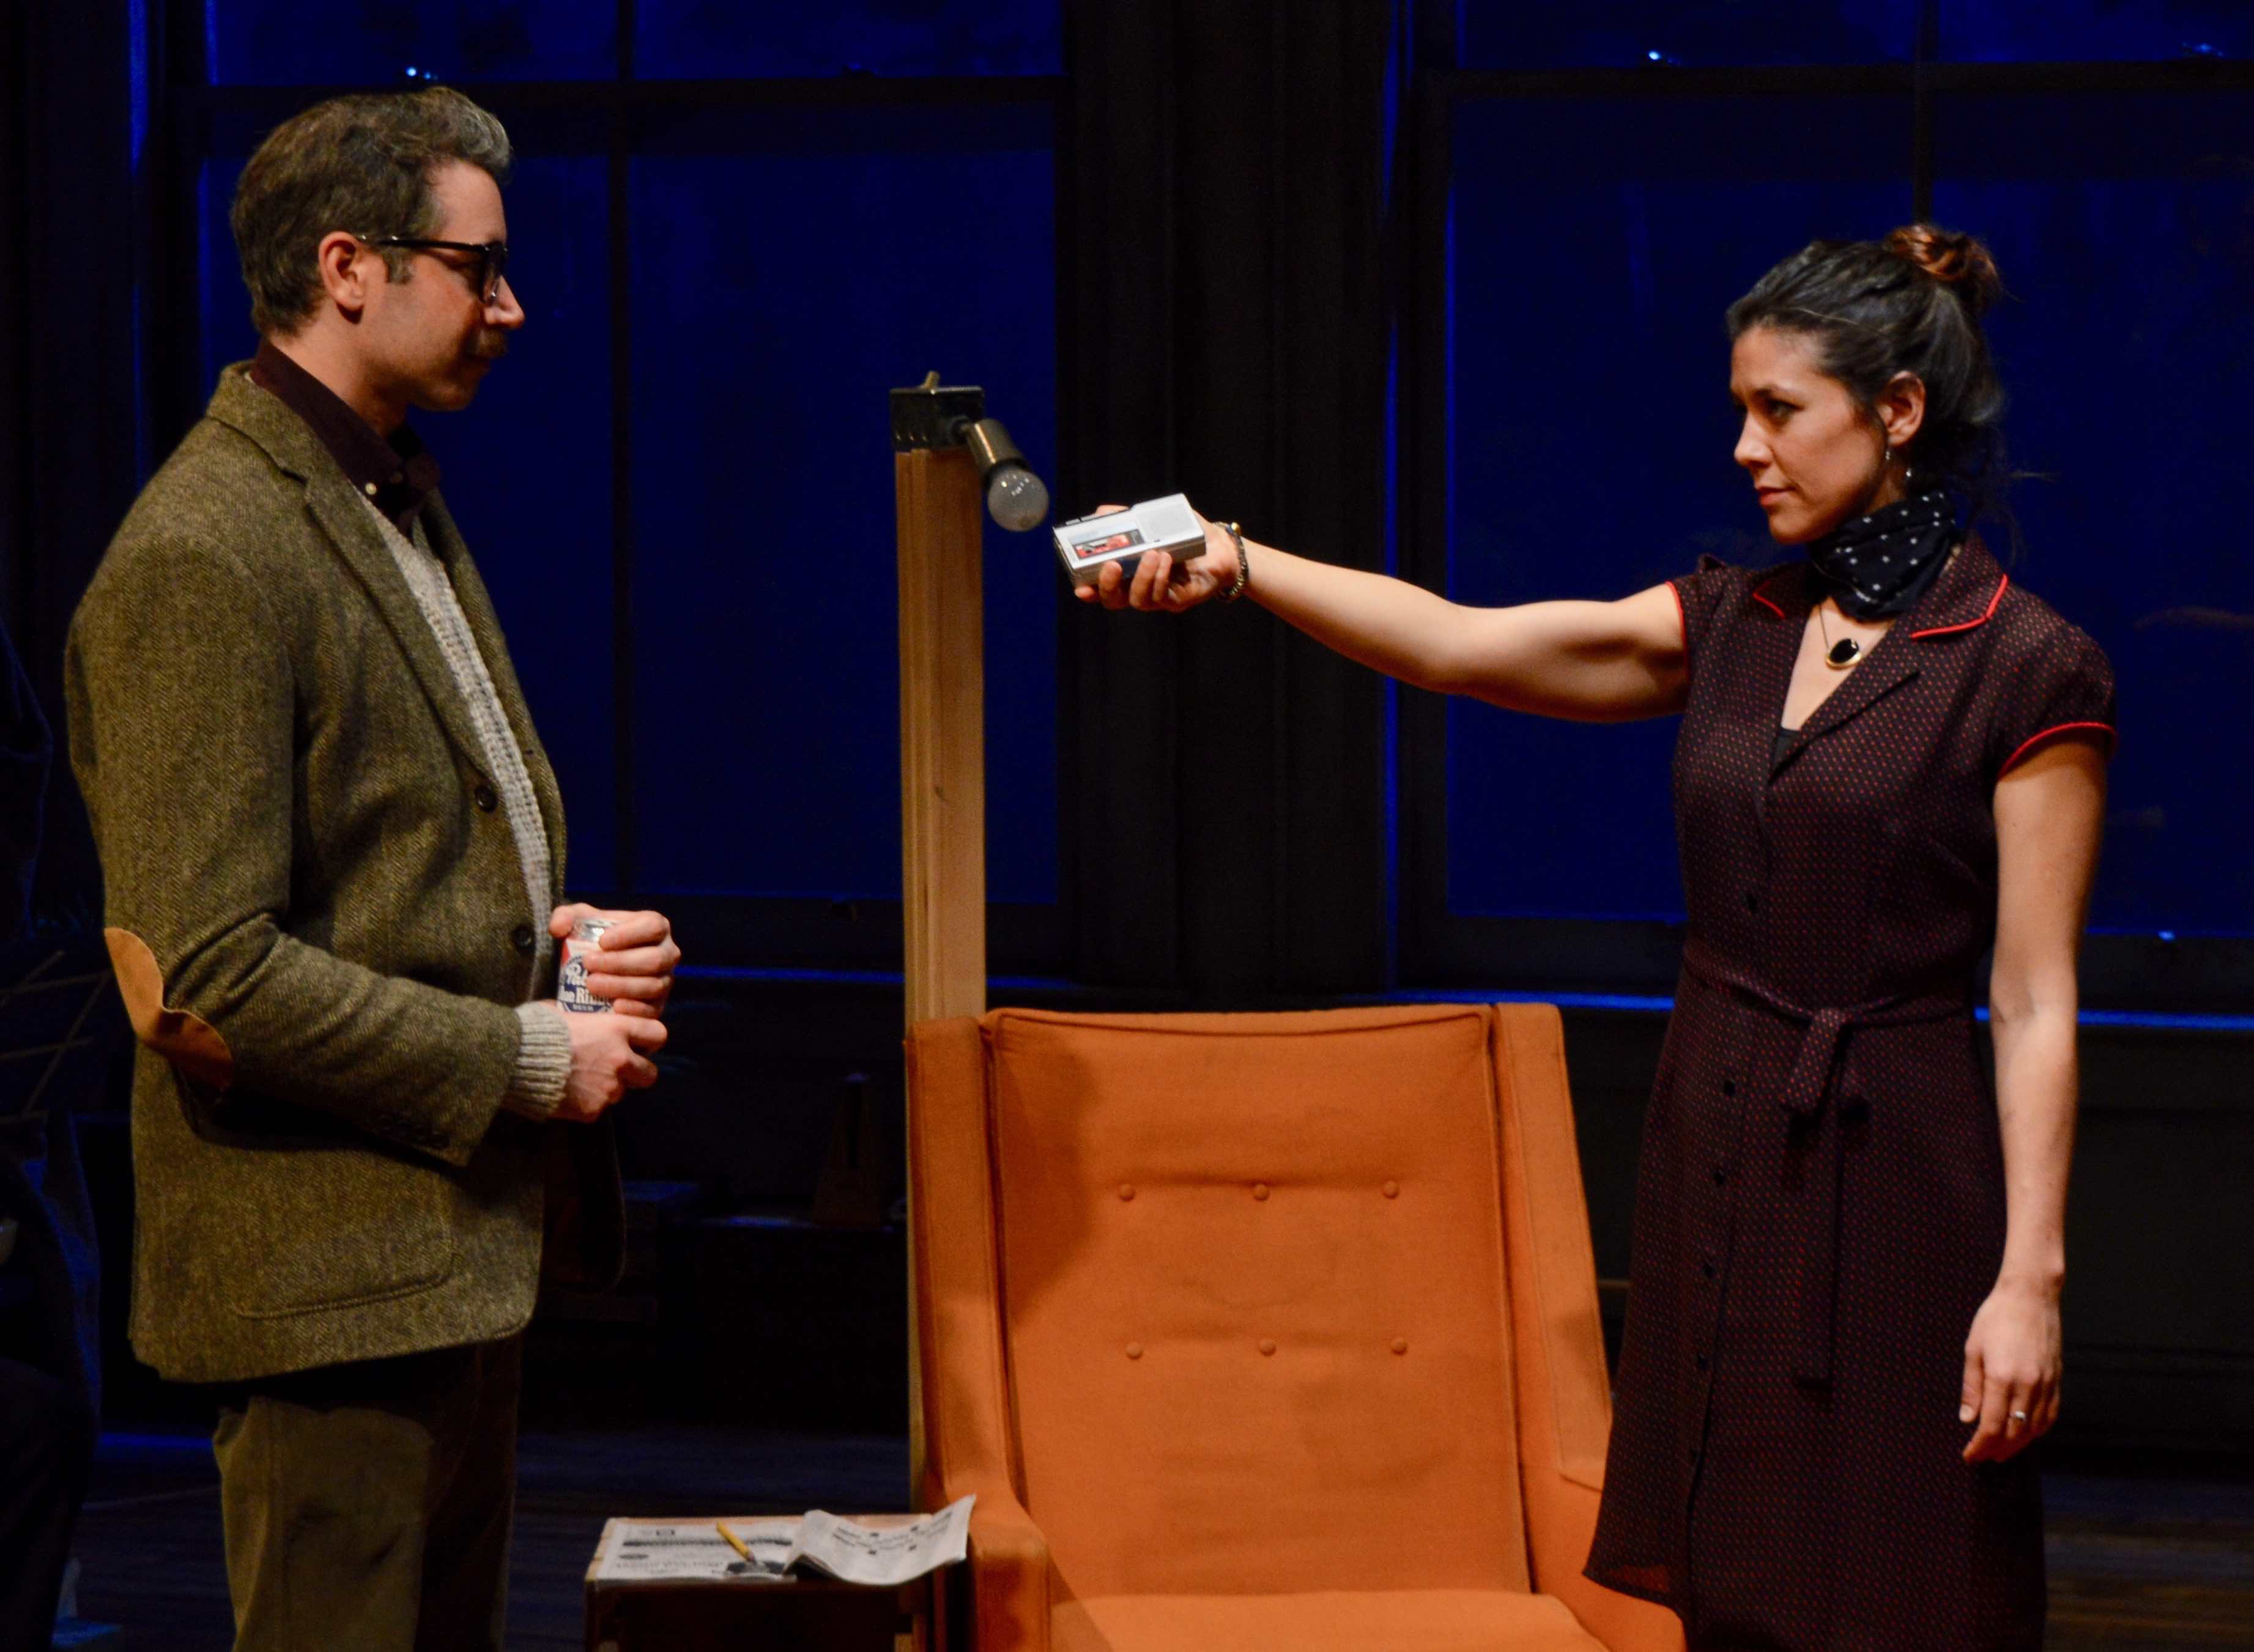 Andrew Pastides as Walter and Zoë Winters as Maggie. Photo by Julie Haber